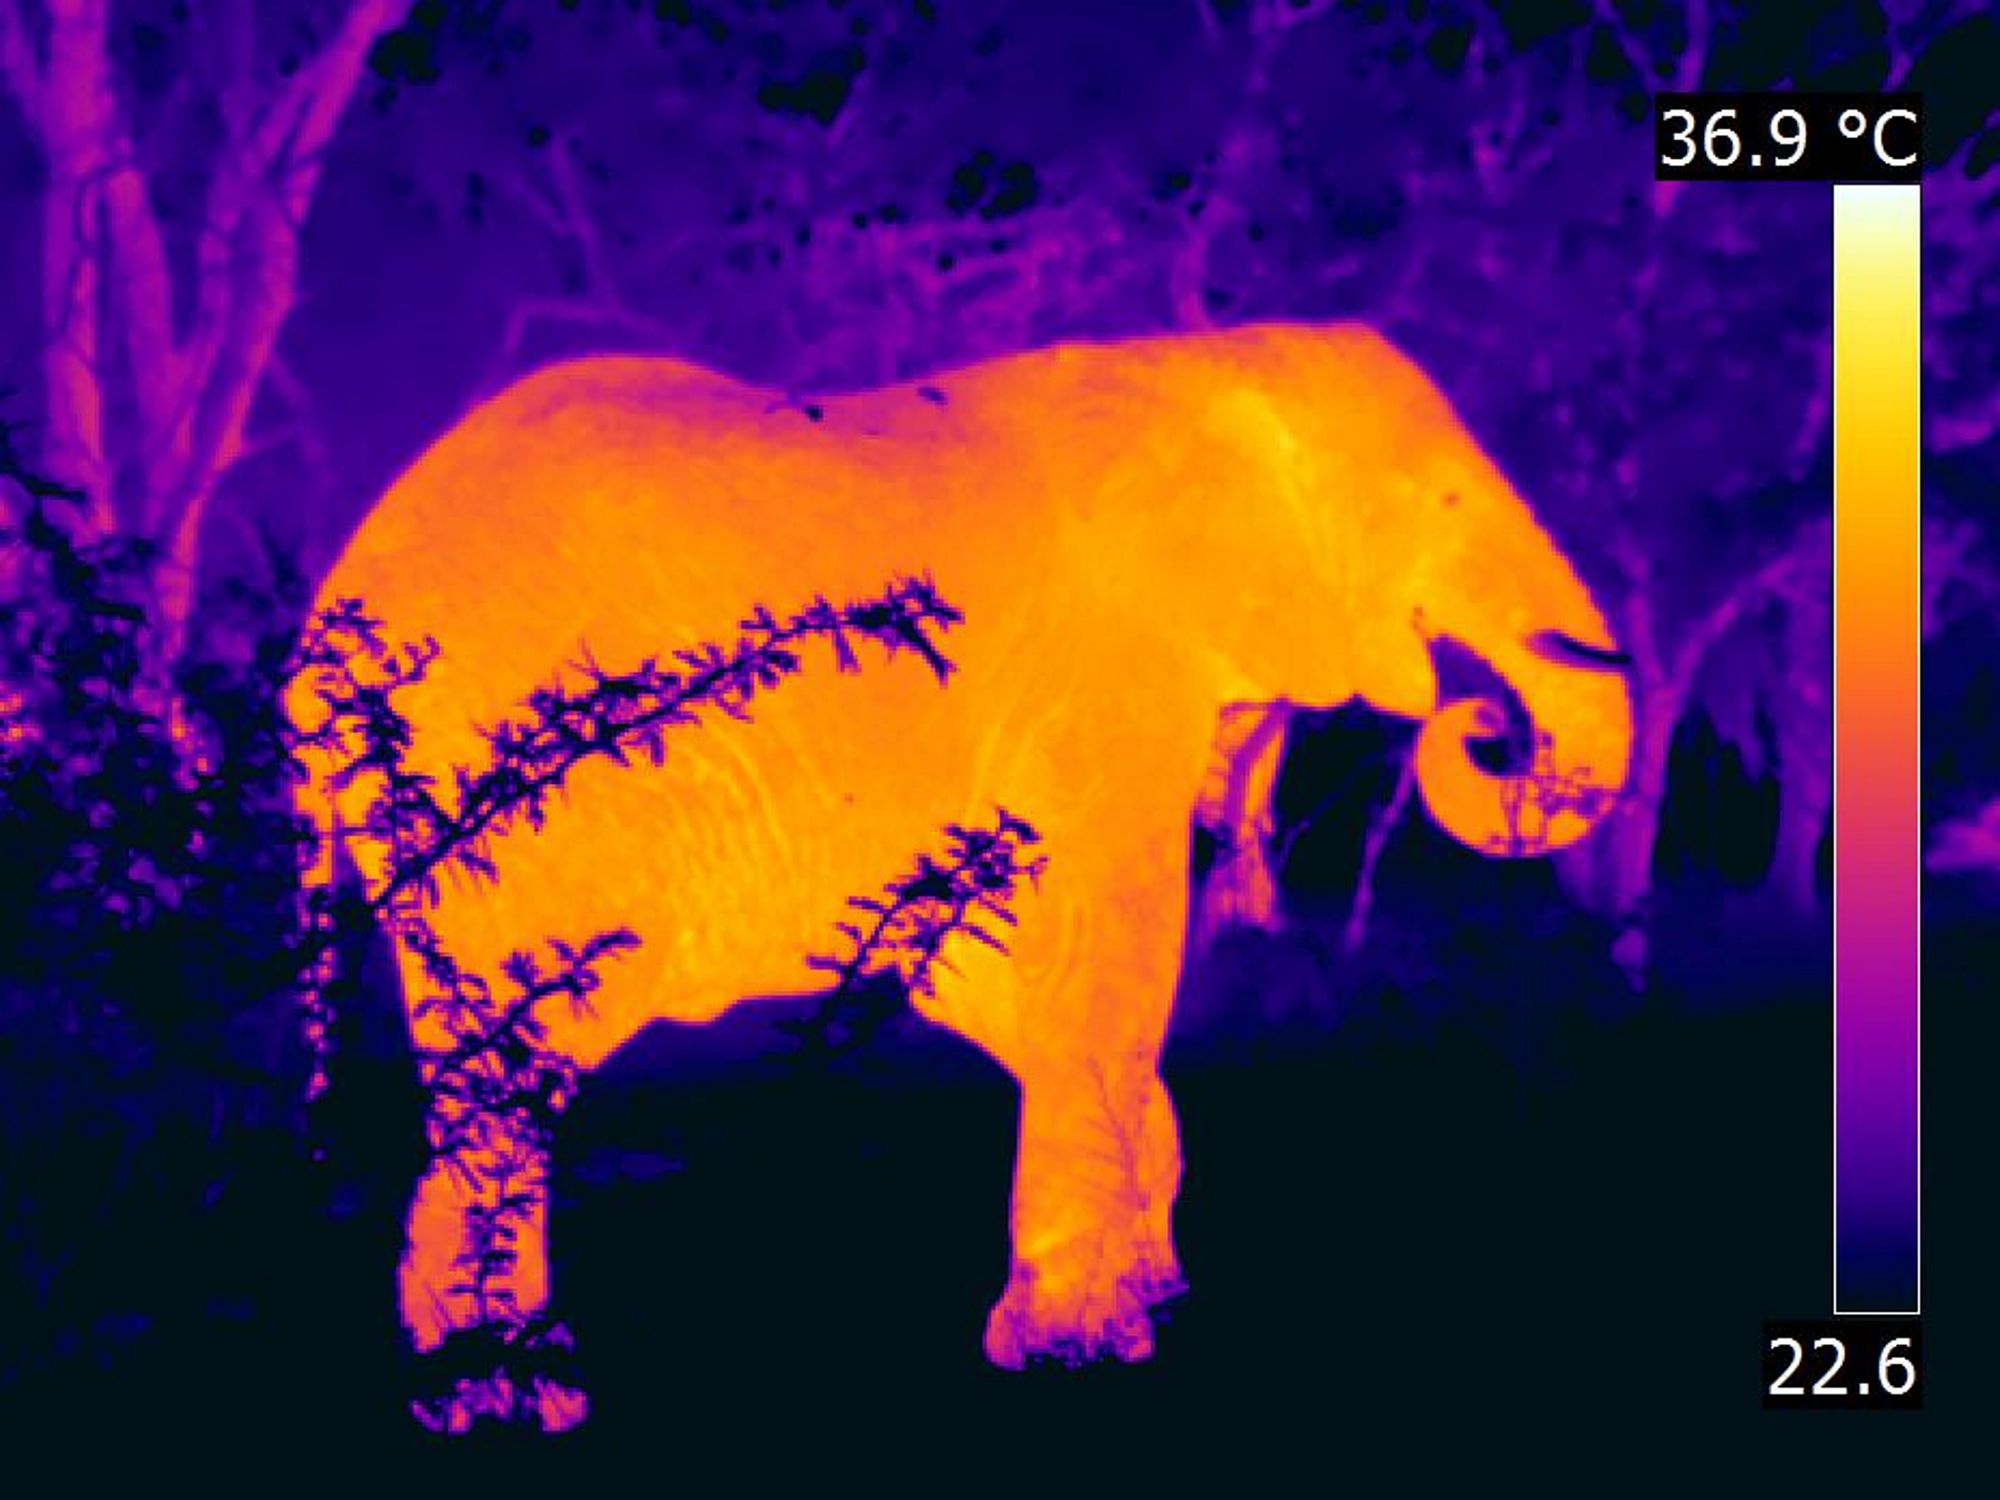 An image taken of an elephant using a thermal camera.